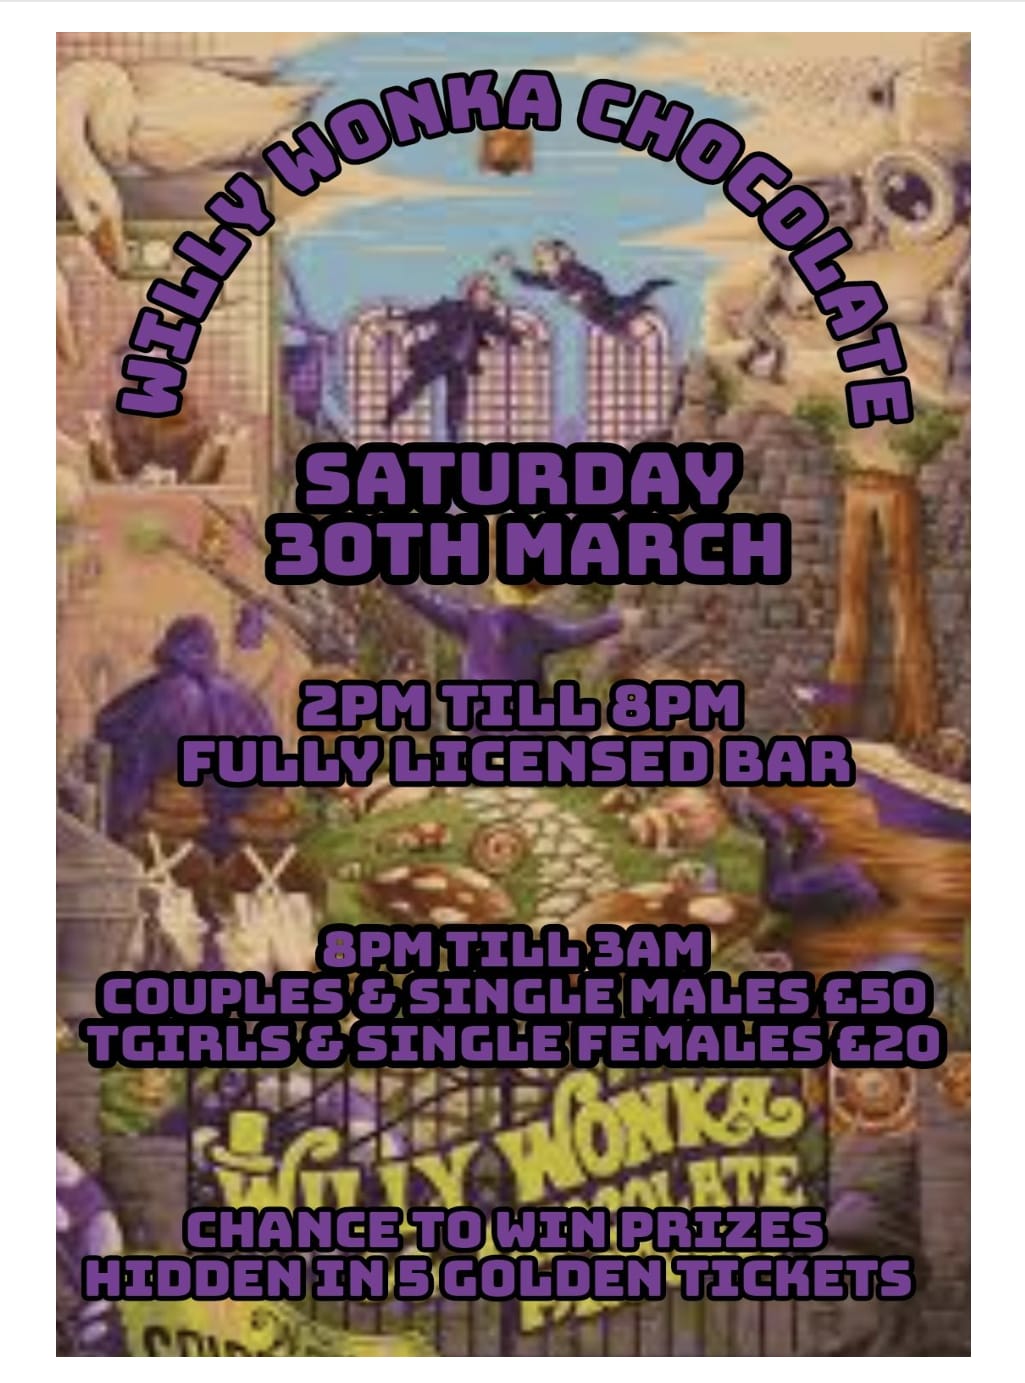 WILLY WONKAS FREE LICENSED BAR @ CLUB PLAY SAT 30th MARCH GOLD TICKETS-BIG PRIZES-MONTHS FREE ENTRY